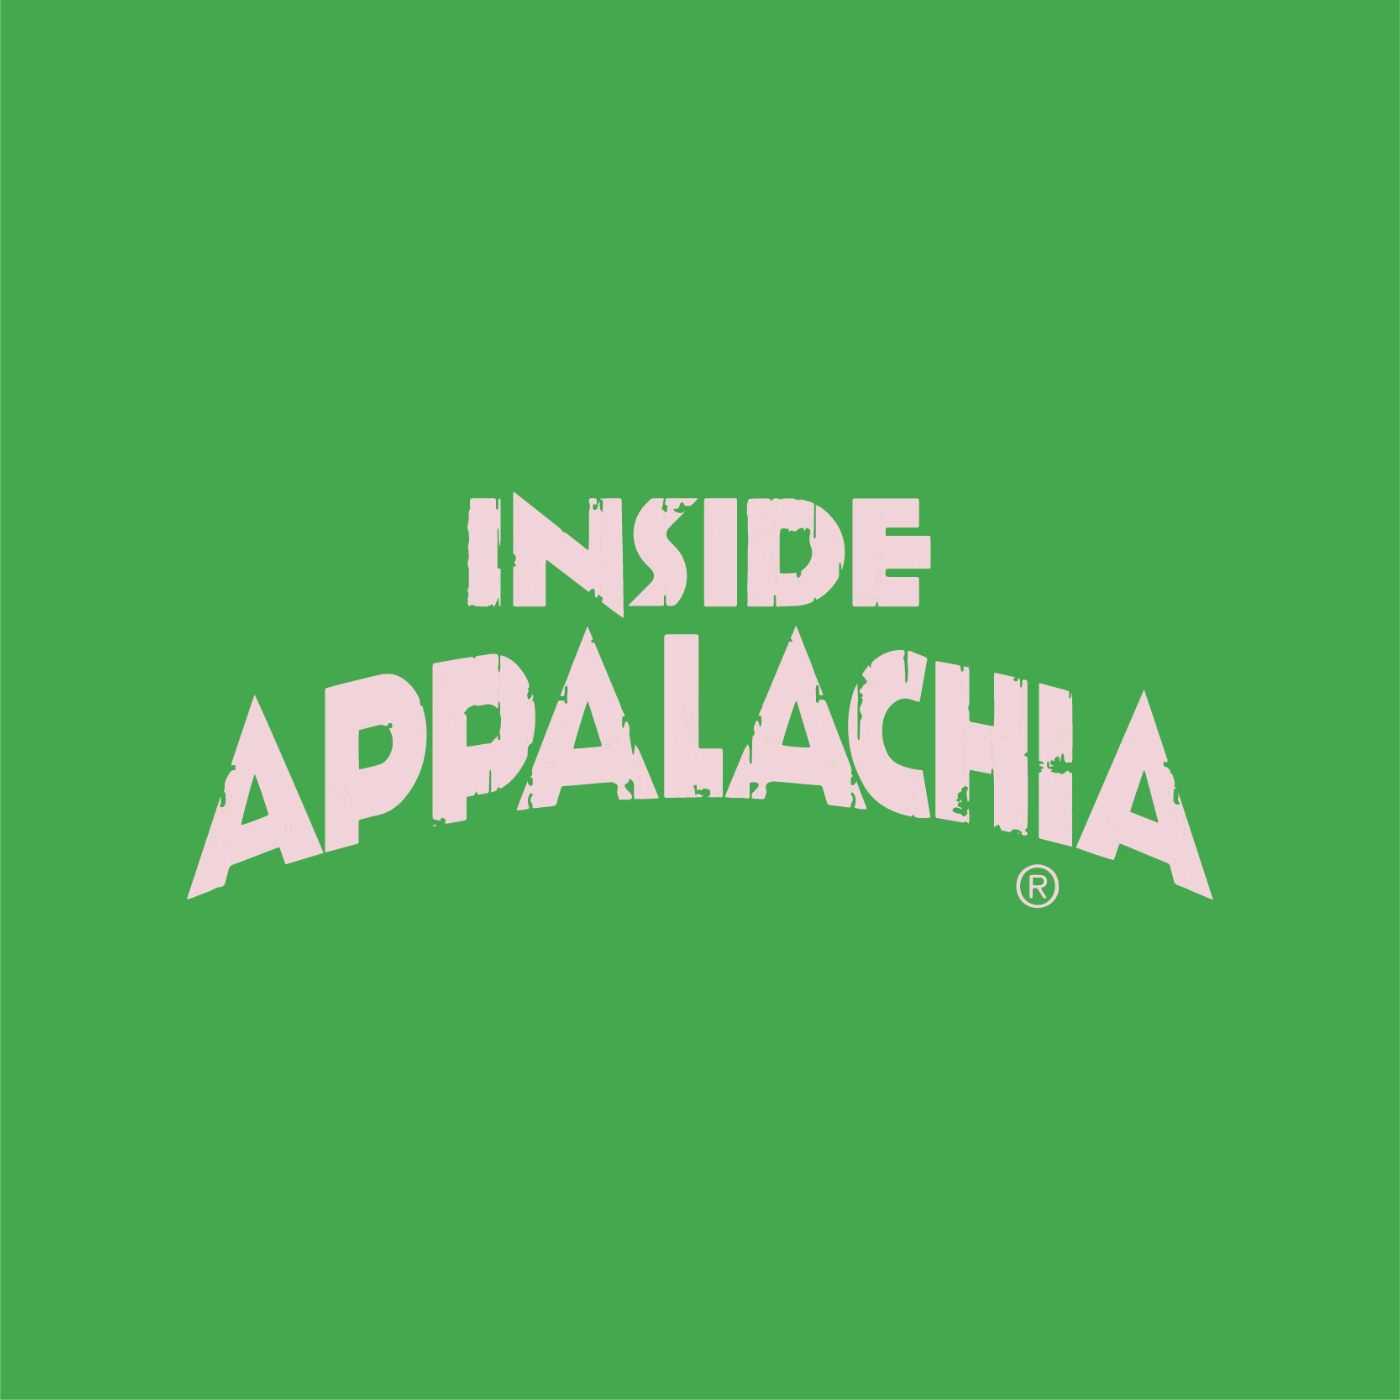 Chair Caning And A Housing Fight, Inside Appalachia